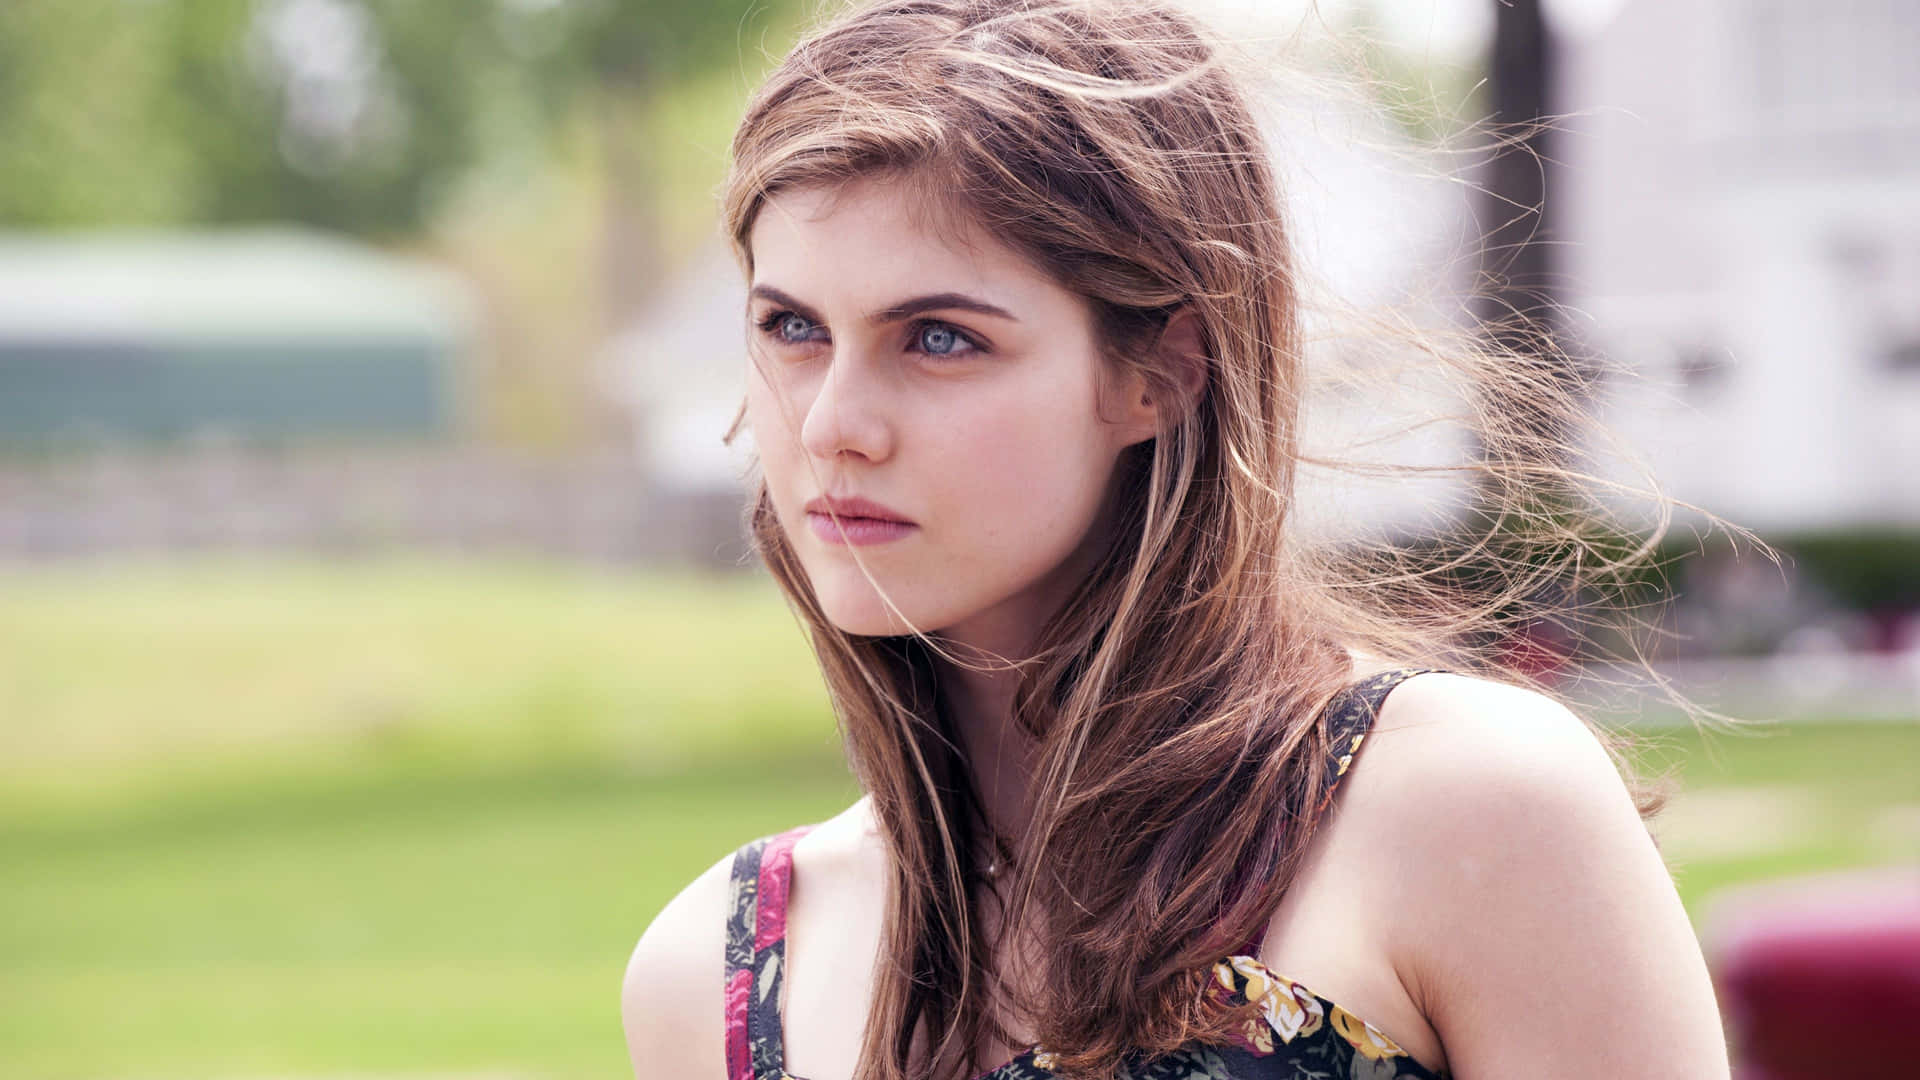 Alexandra Daddario striking a pose in a stunning outfit